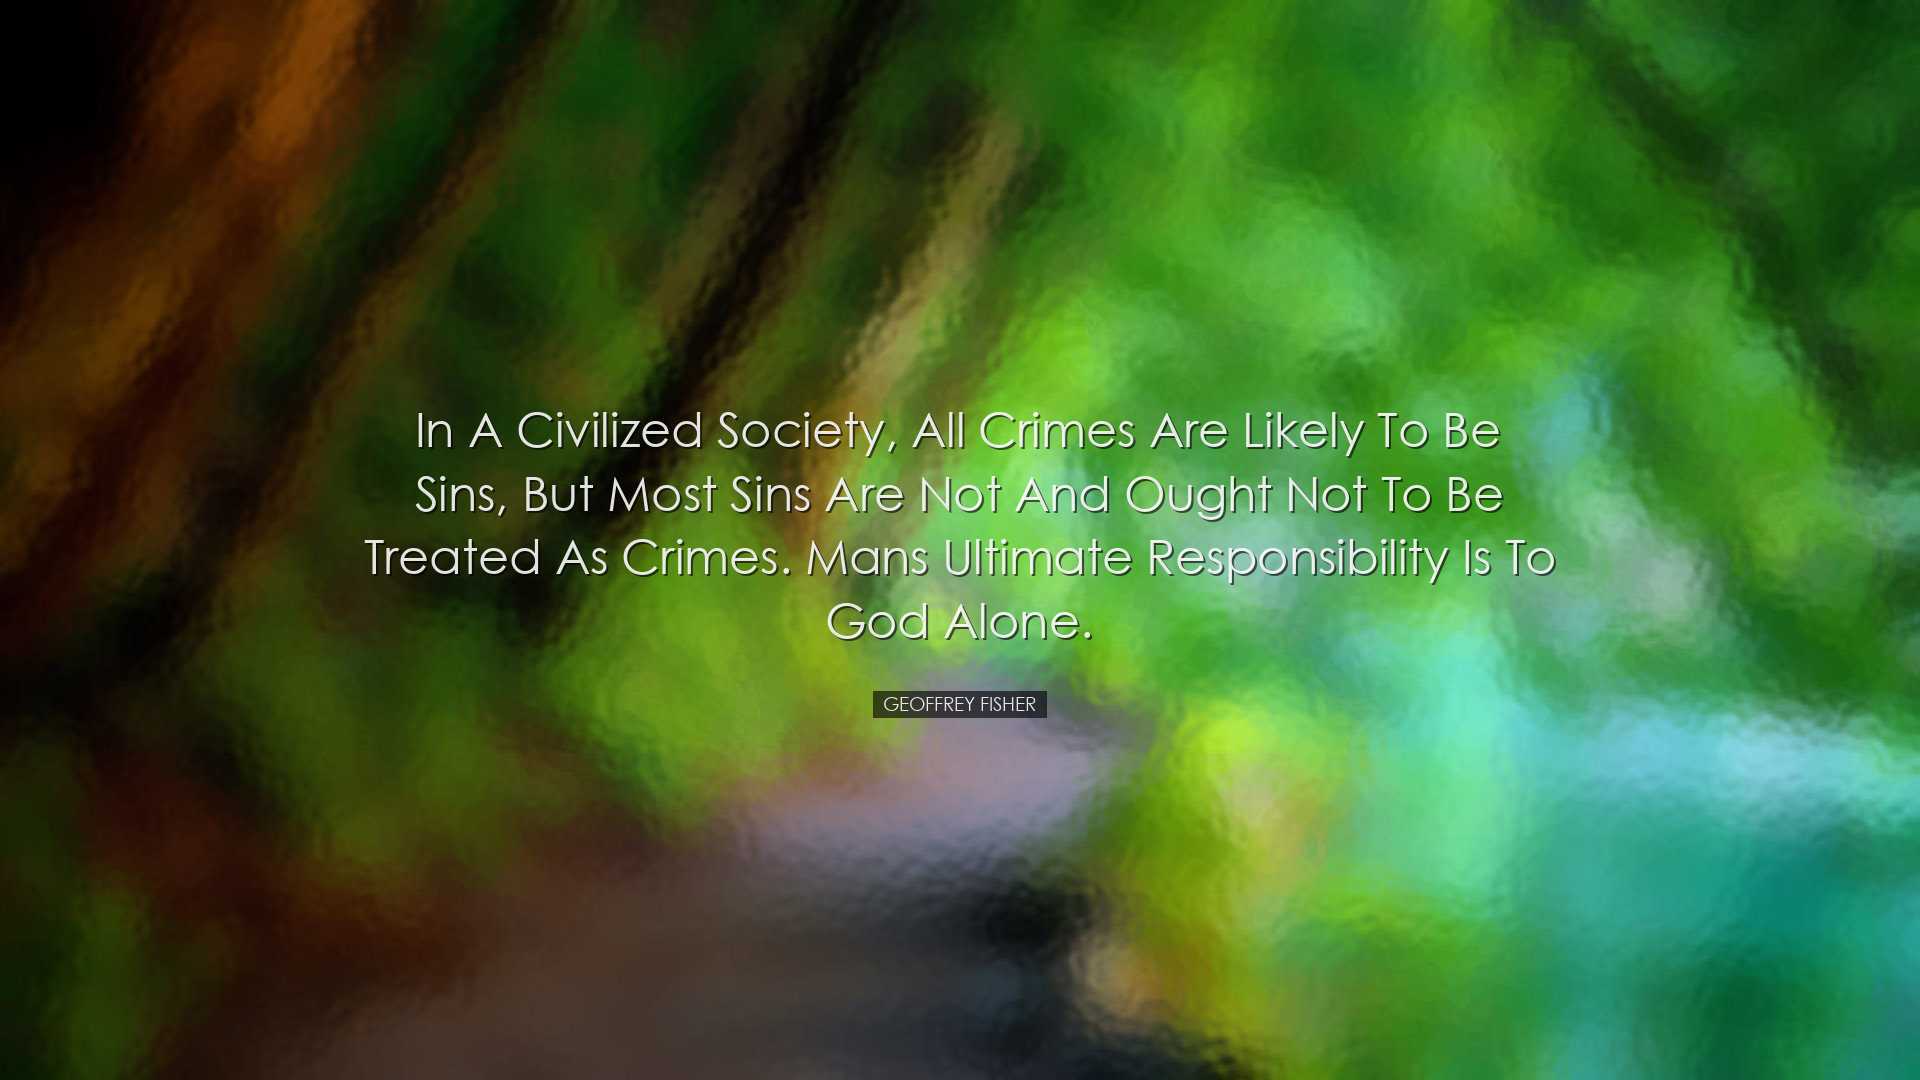 In a civilized society, all crimes are likely to be sins, but most